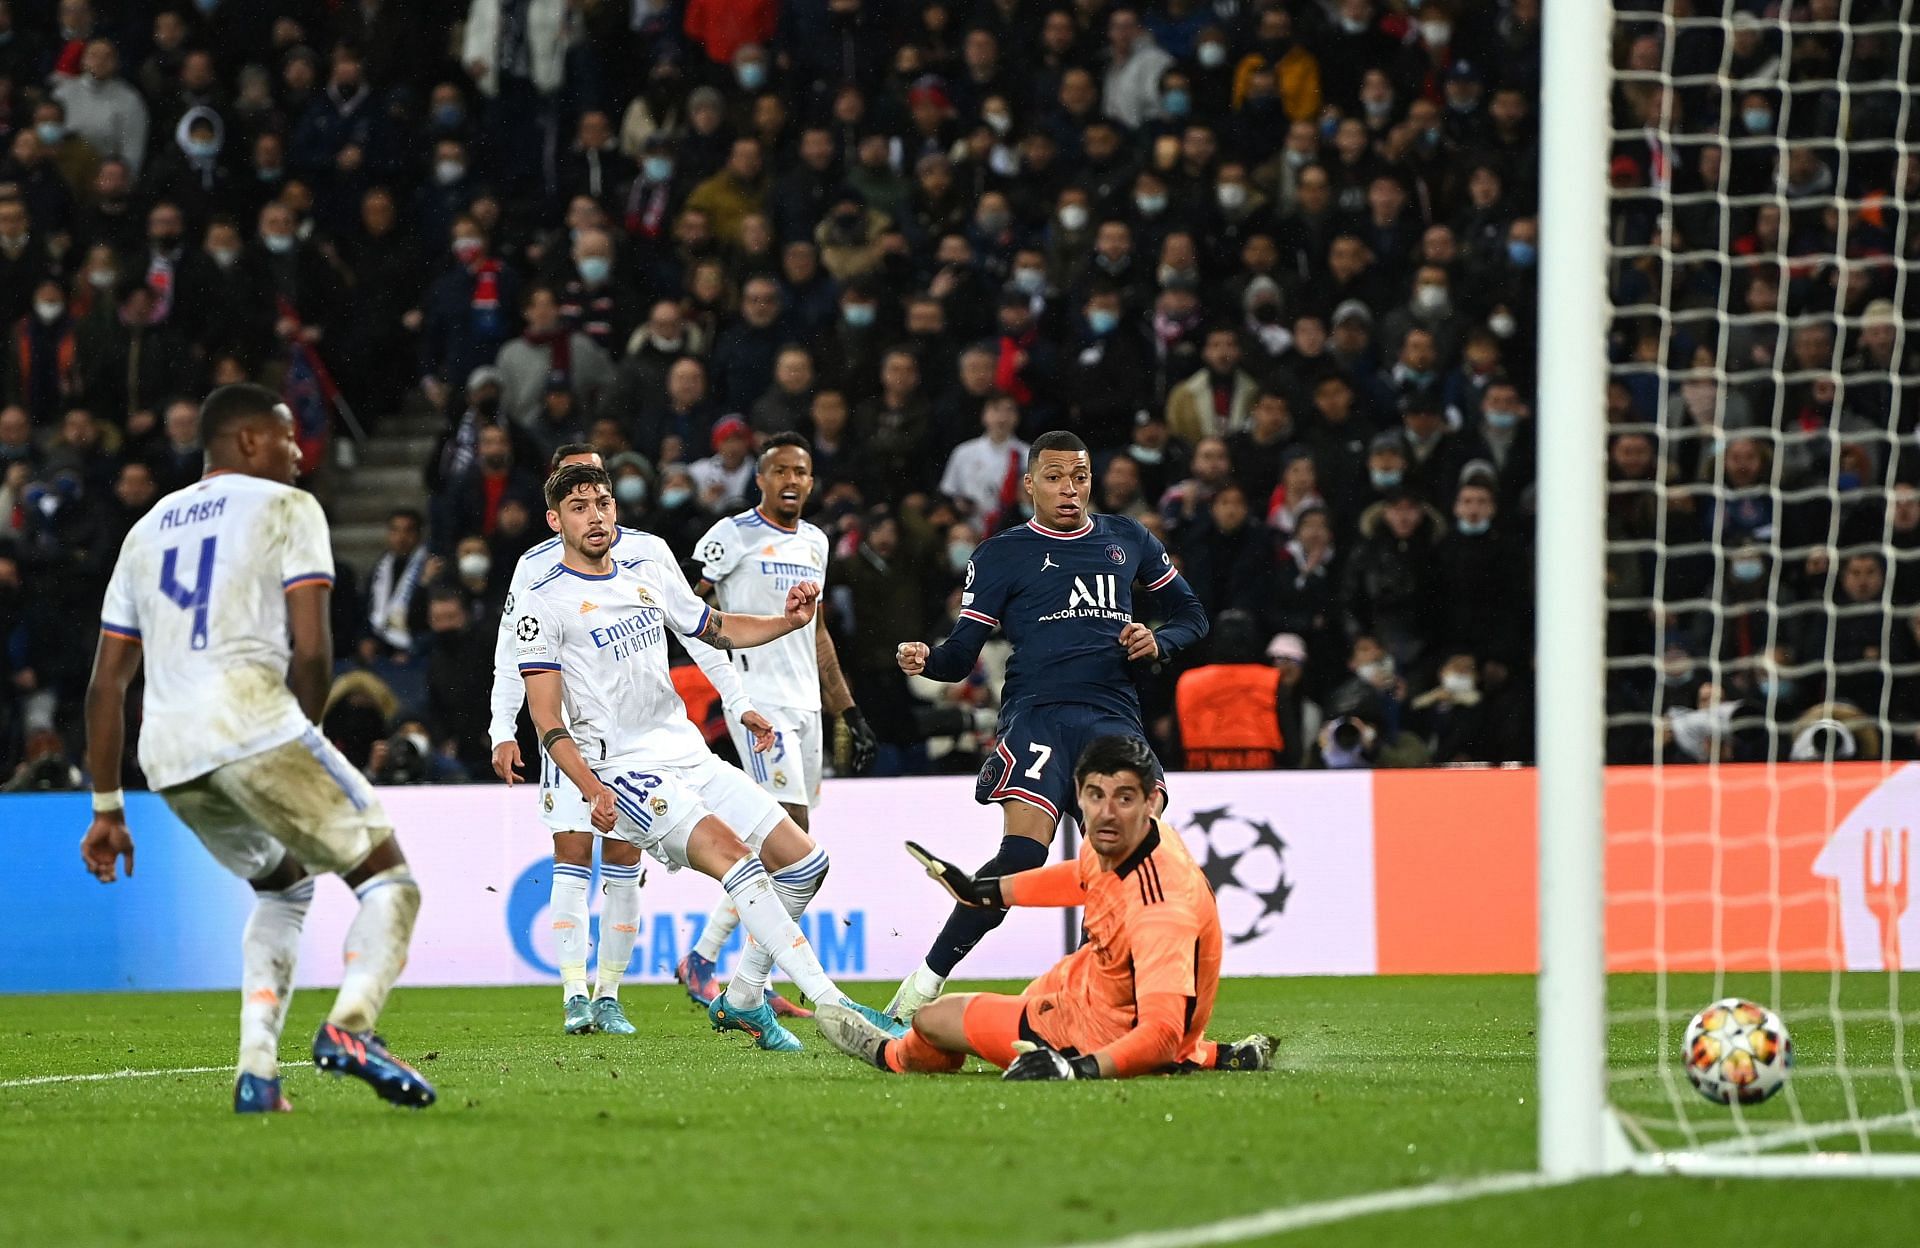 Kylian Mbappe scored the winner for Paris Saint-Germain as he got the better of Thibaut Courtois in extra time